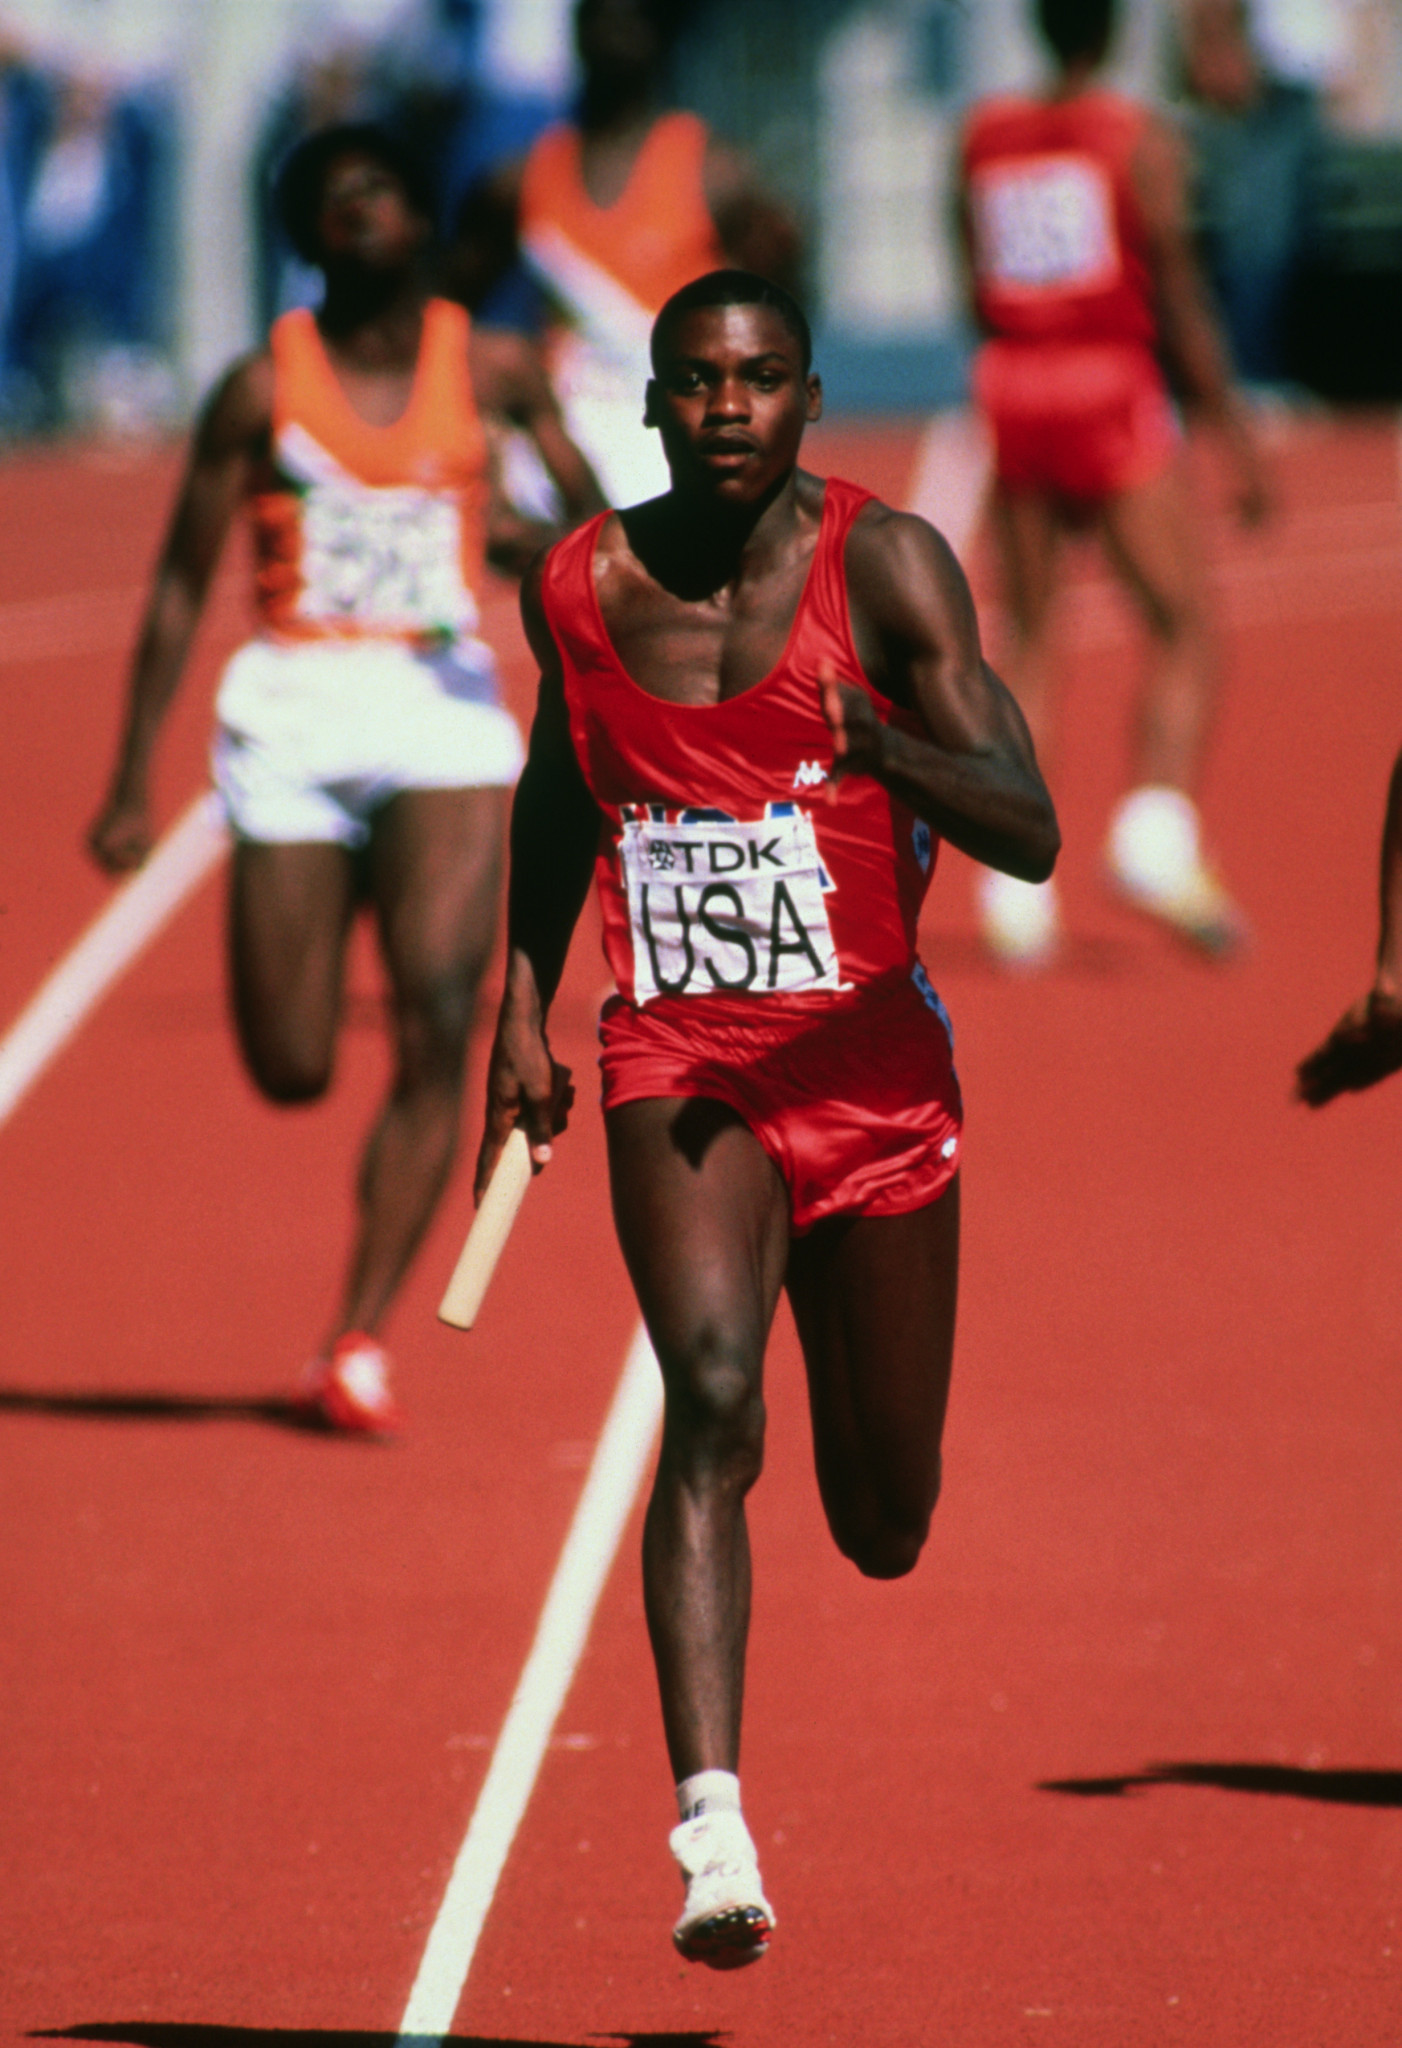 TDK Corporation have sponsored the IAAF since the first World Championships at Helsinki in 1983 ©Getty Images